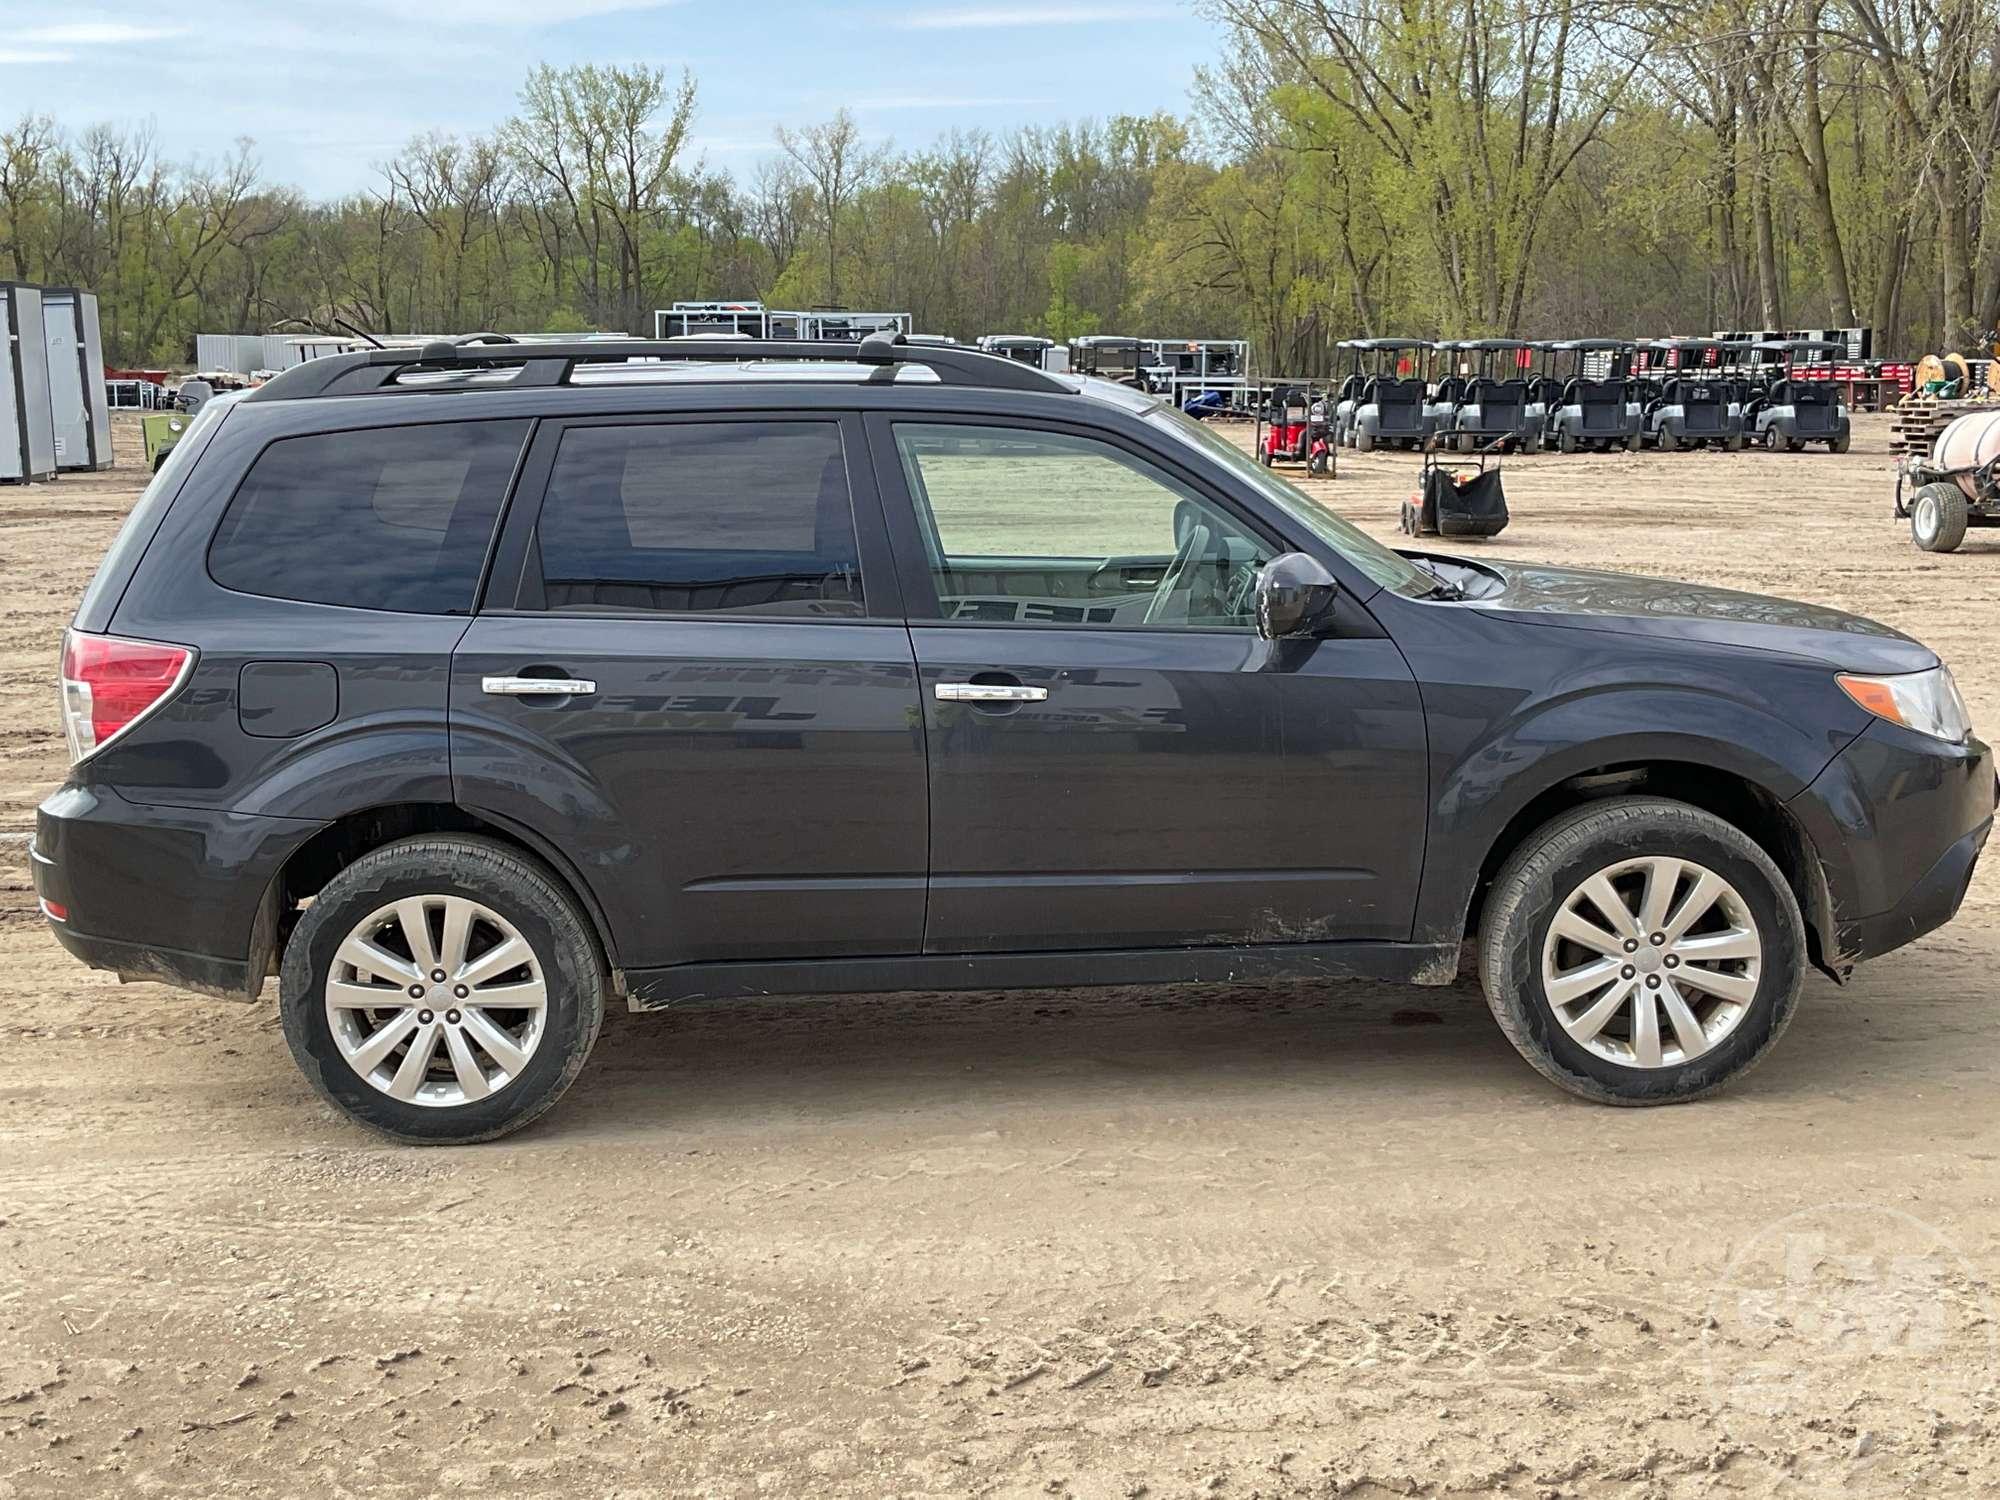 2013 SUBARU FORESTER VIN: JF2SHADC0DH433550 AWD